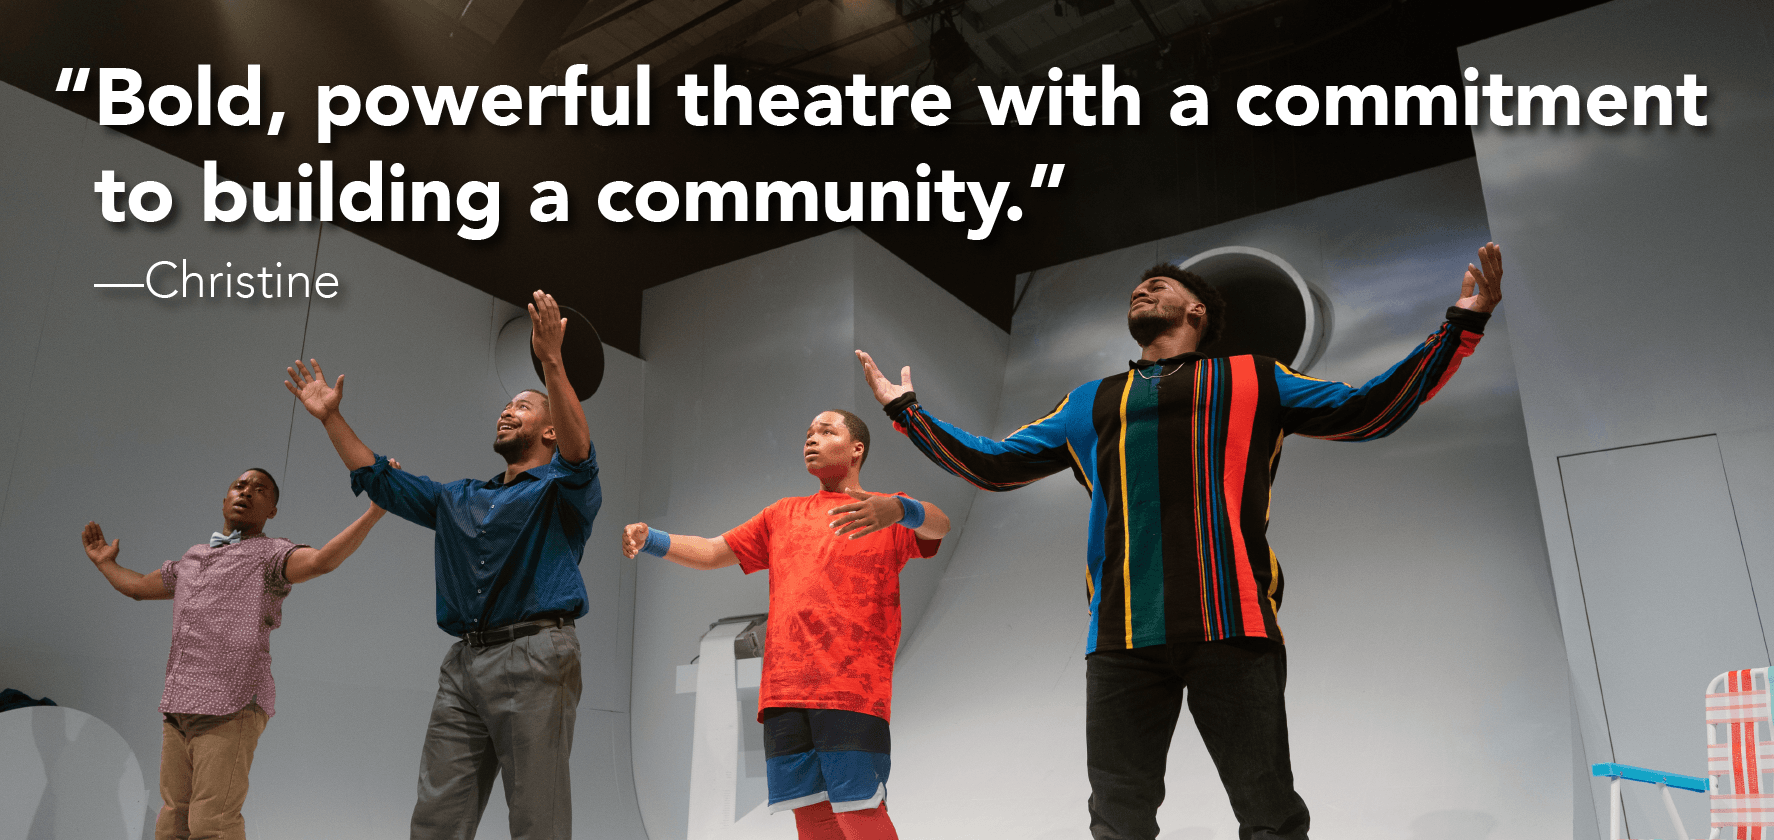 ‘Bold, powerful theater with a commitment to building a community.’ —Christine